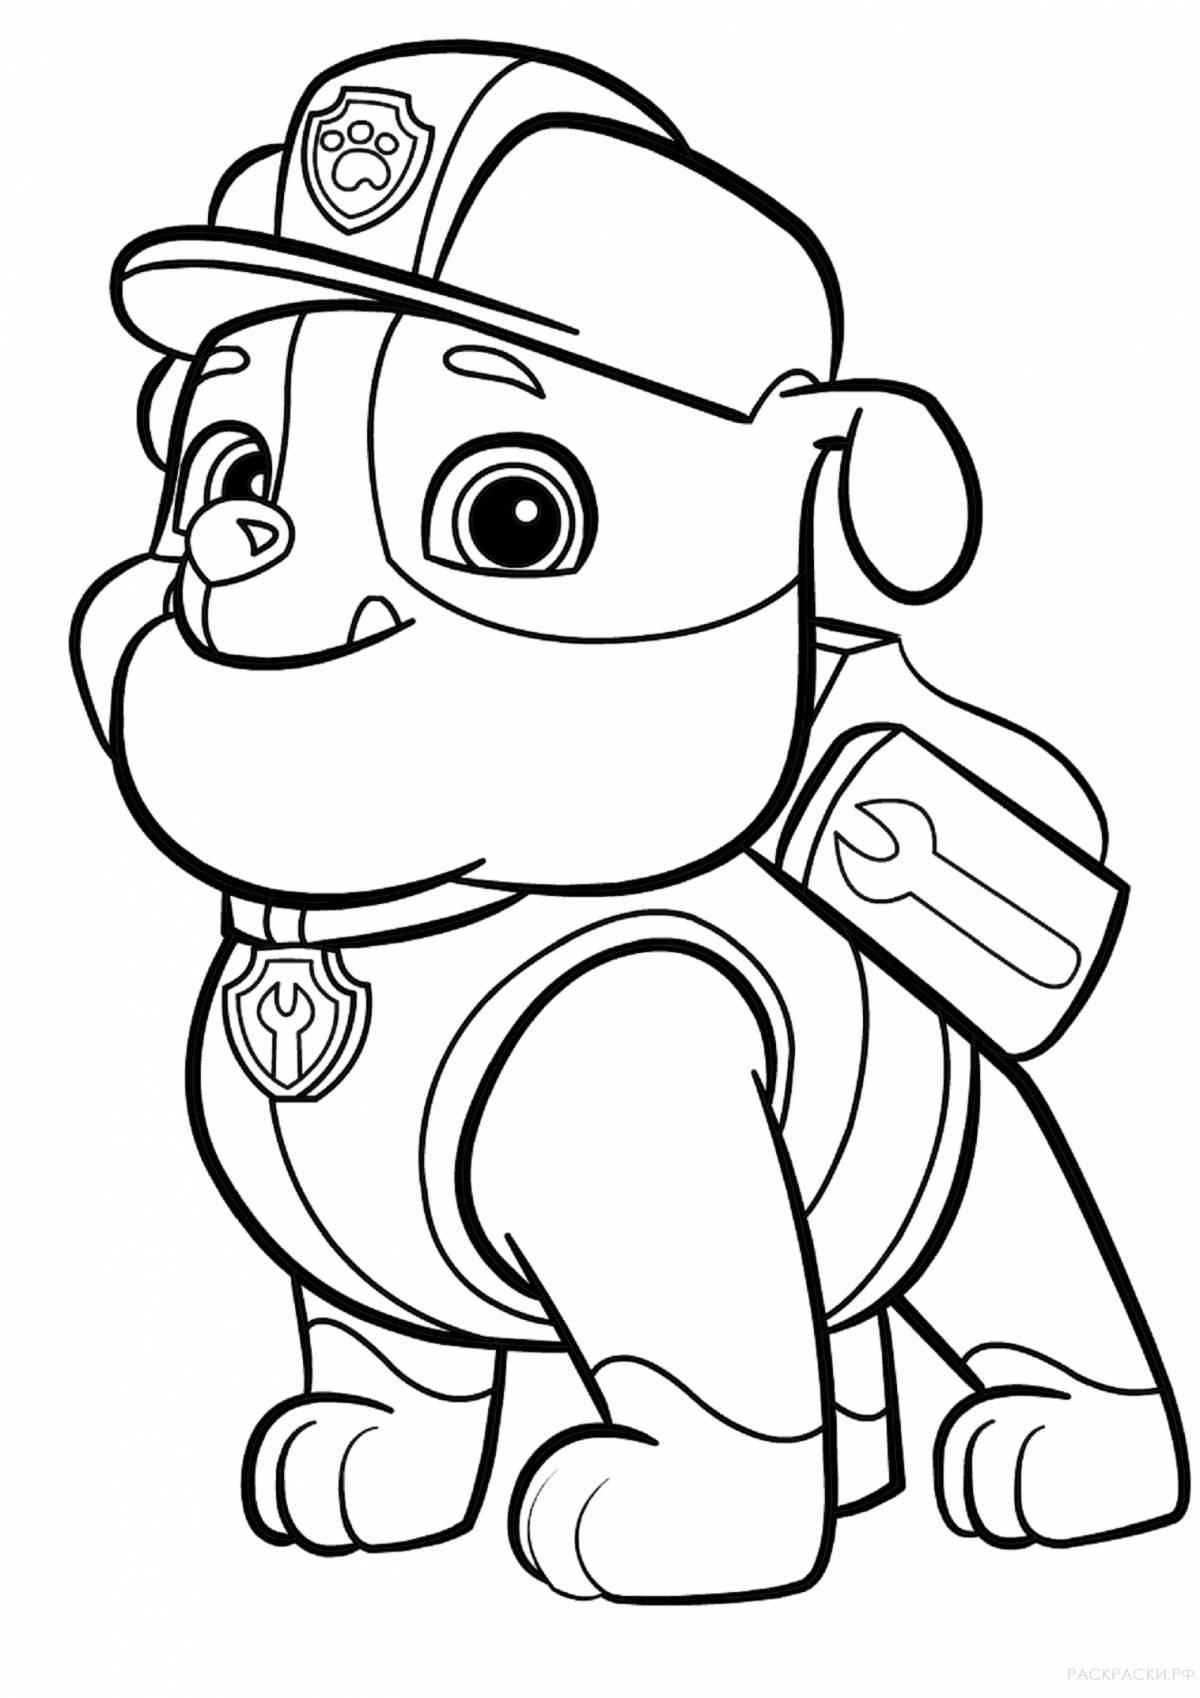 Colorful paw patrol coloring pages pictures